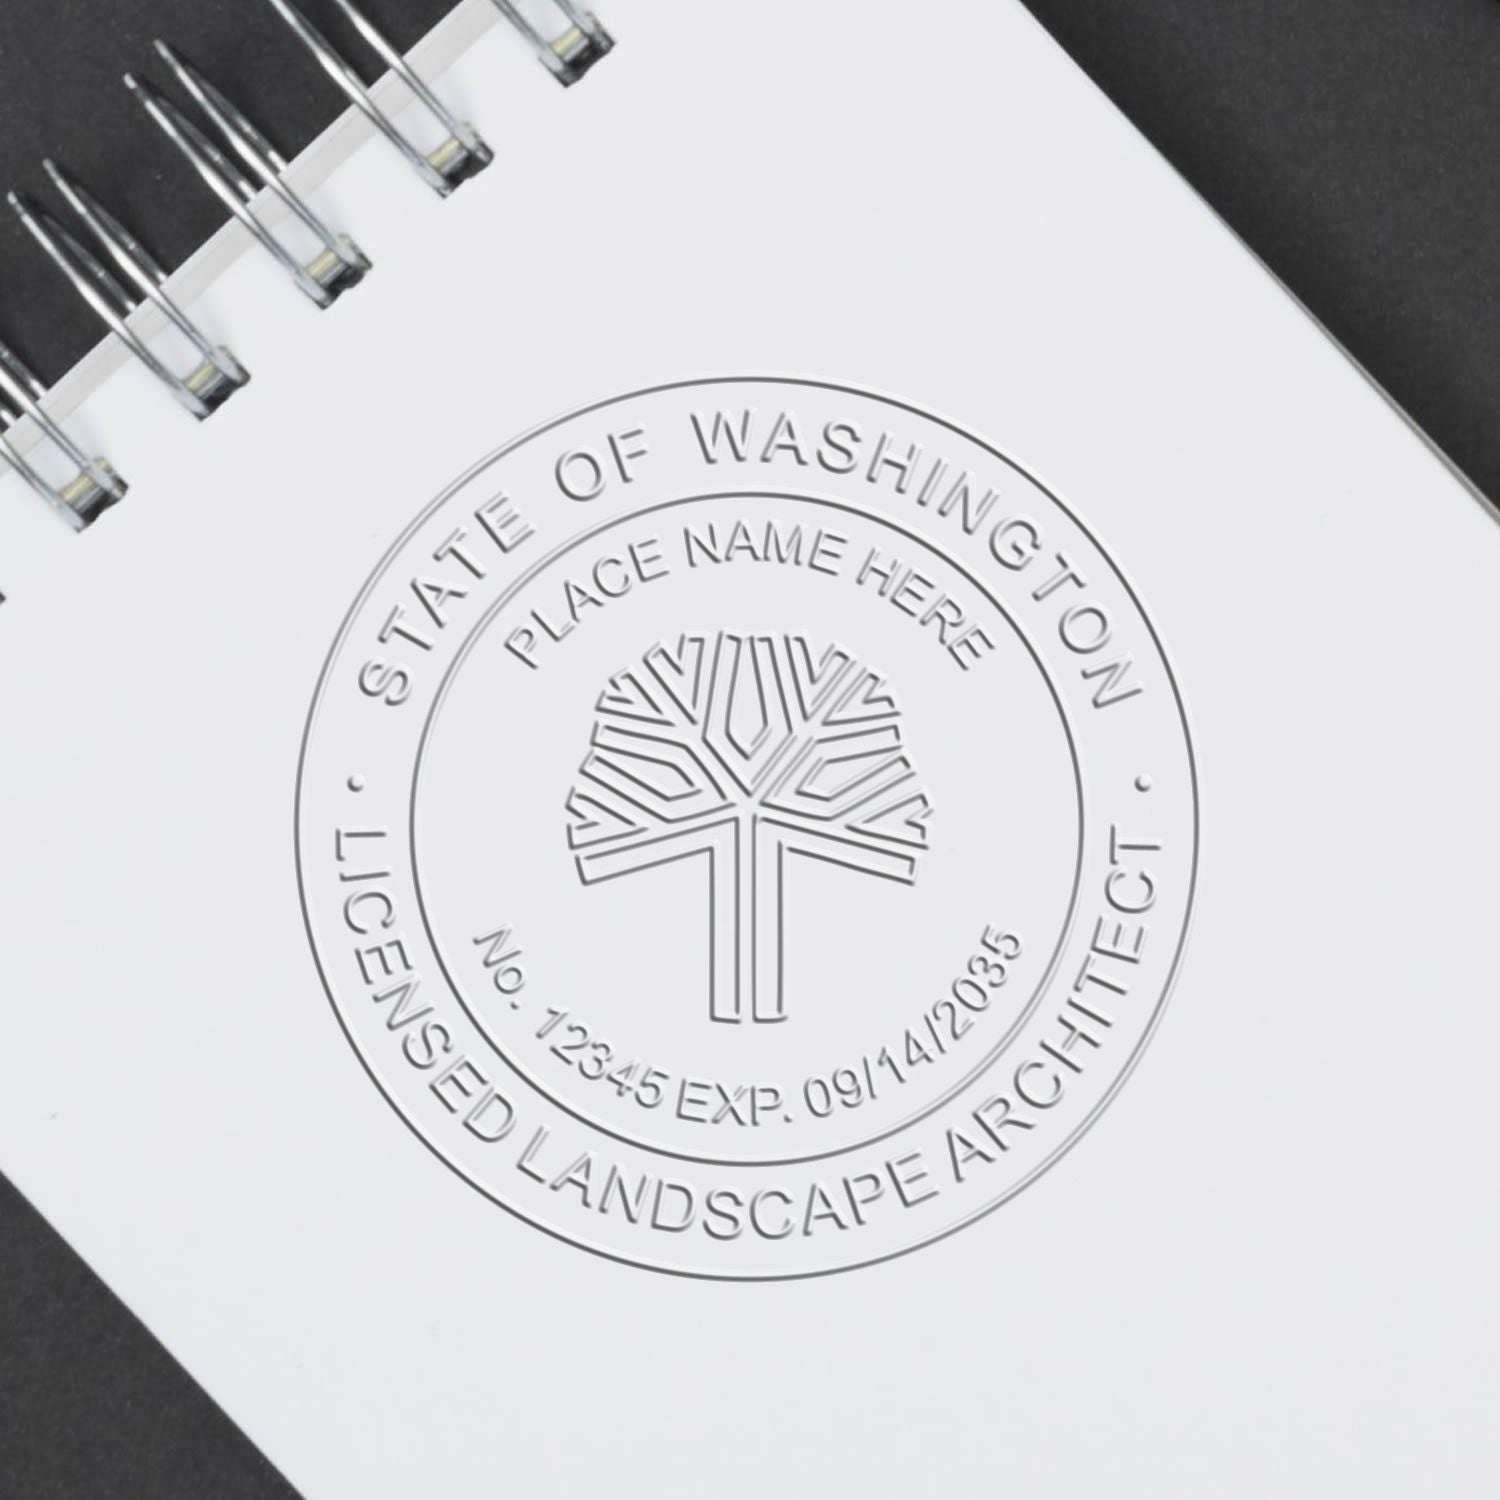 Unveiling Washingtons Landscape Architect Stamp and Seal Laws: Your Essential Guide Feature Image